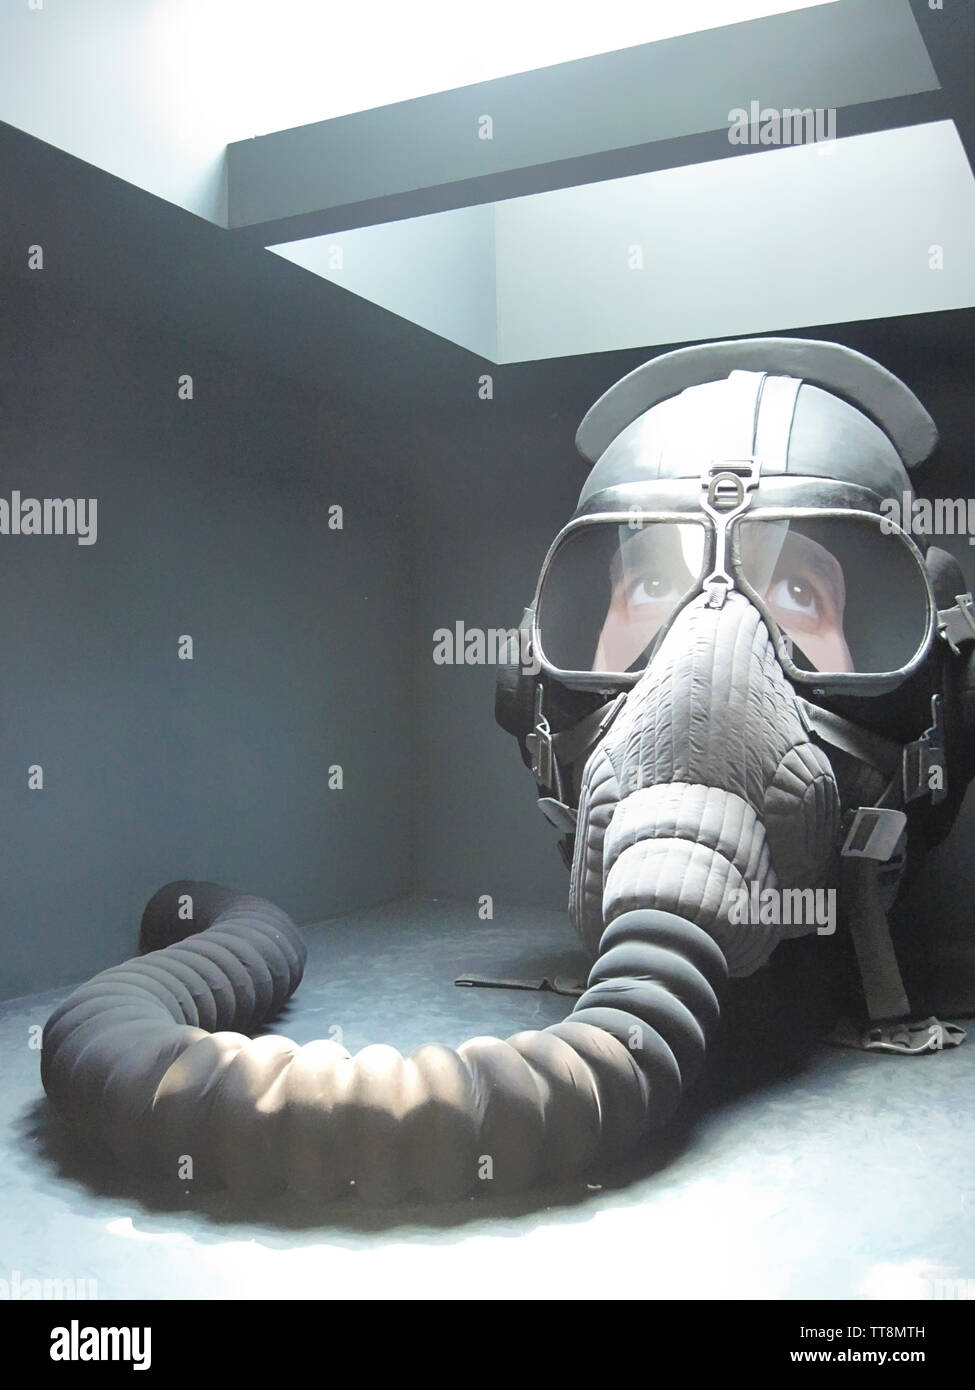 MAN LOOKING AT RUSSIAN INSTALLATION  USING A GAS MASK, BIENNALE 2015, VENICE, ITALY, Stock Photo